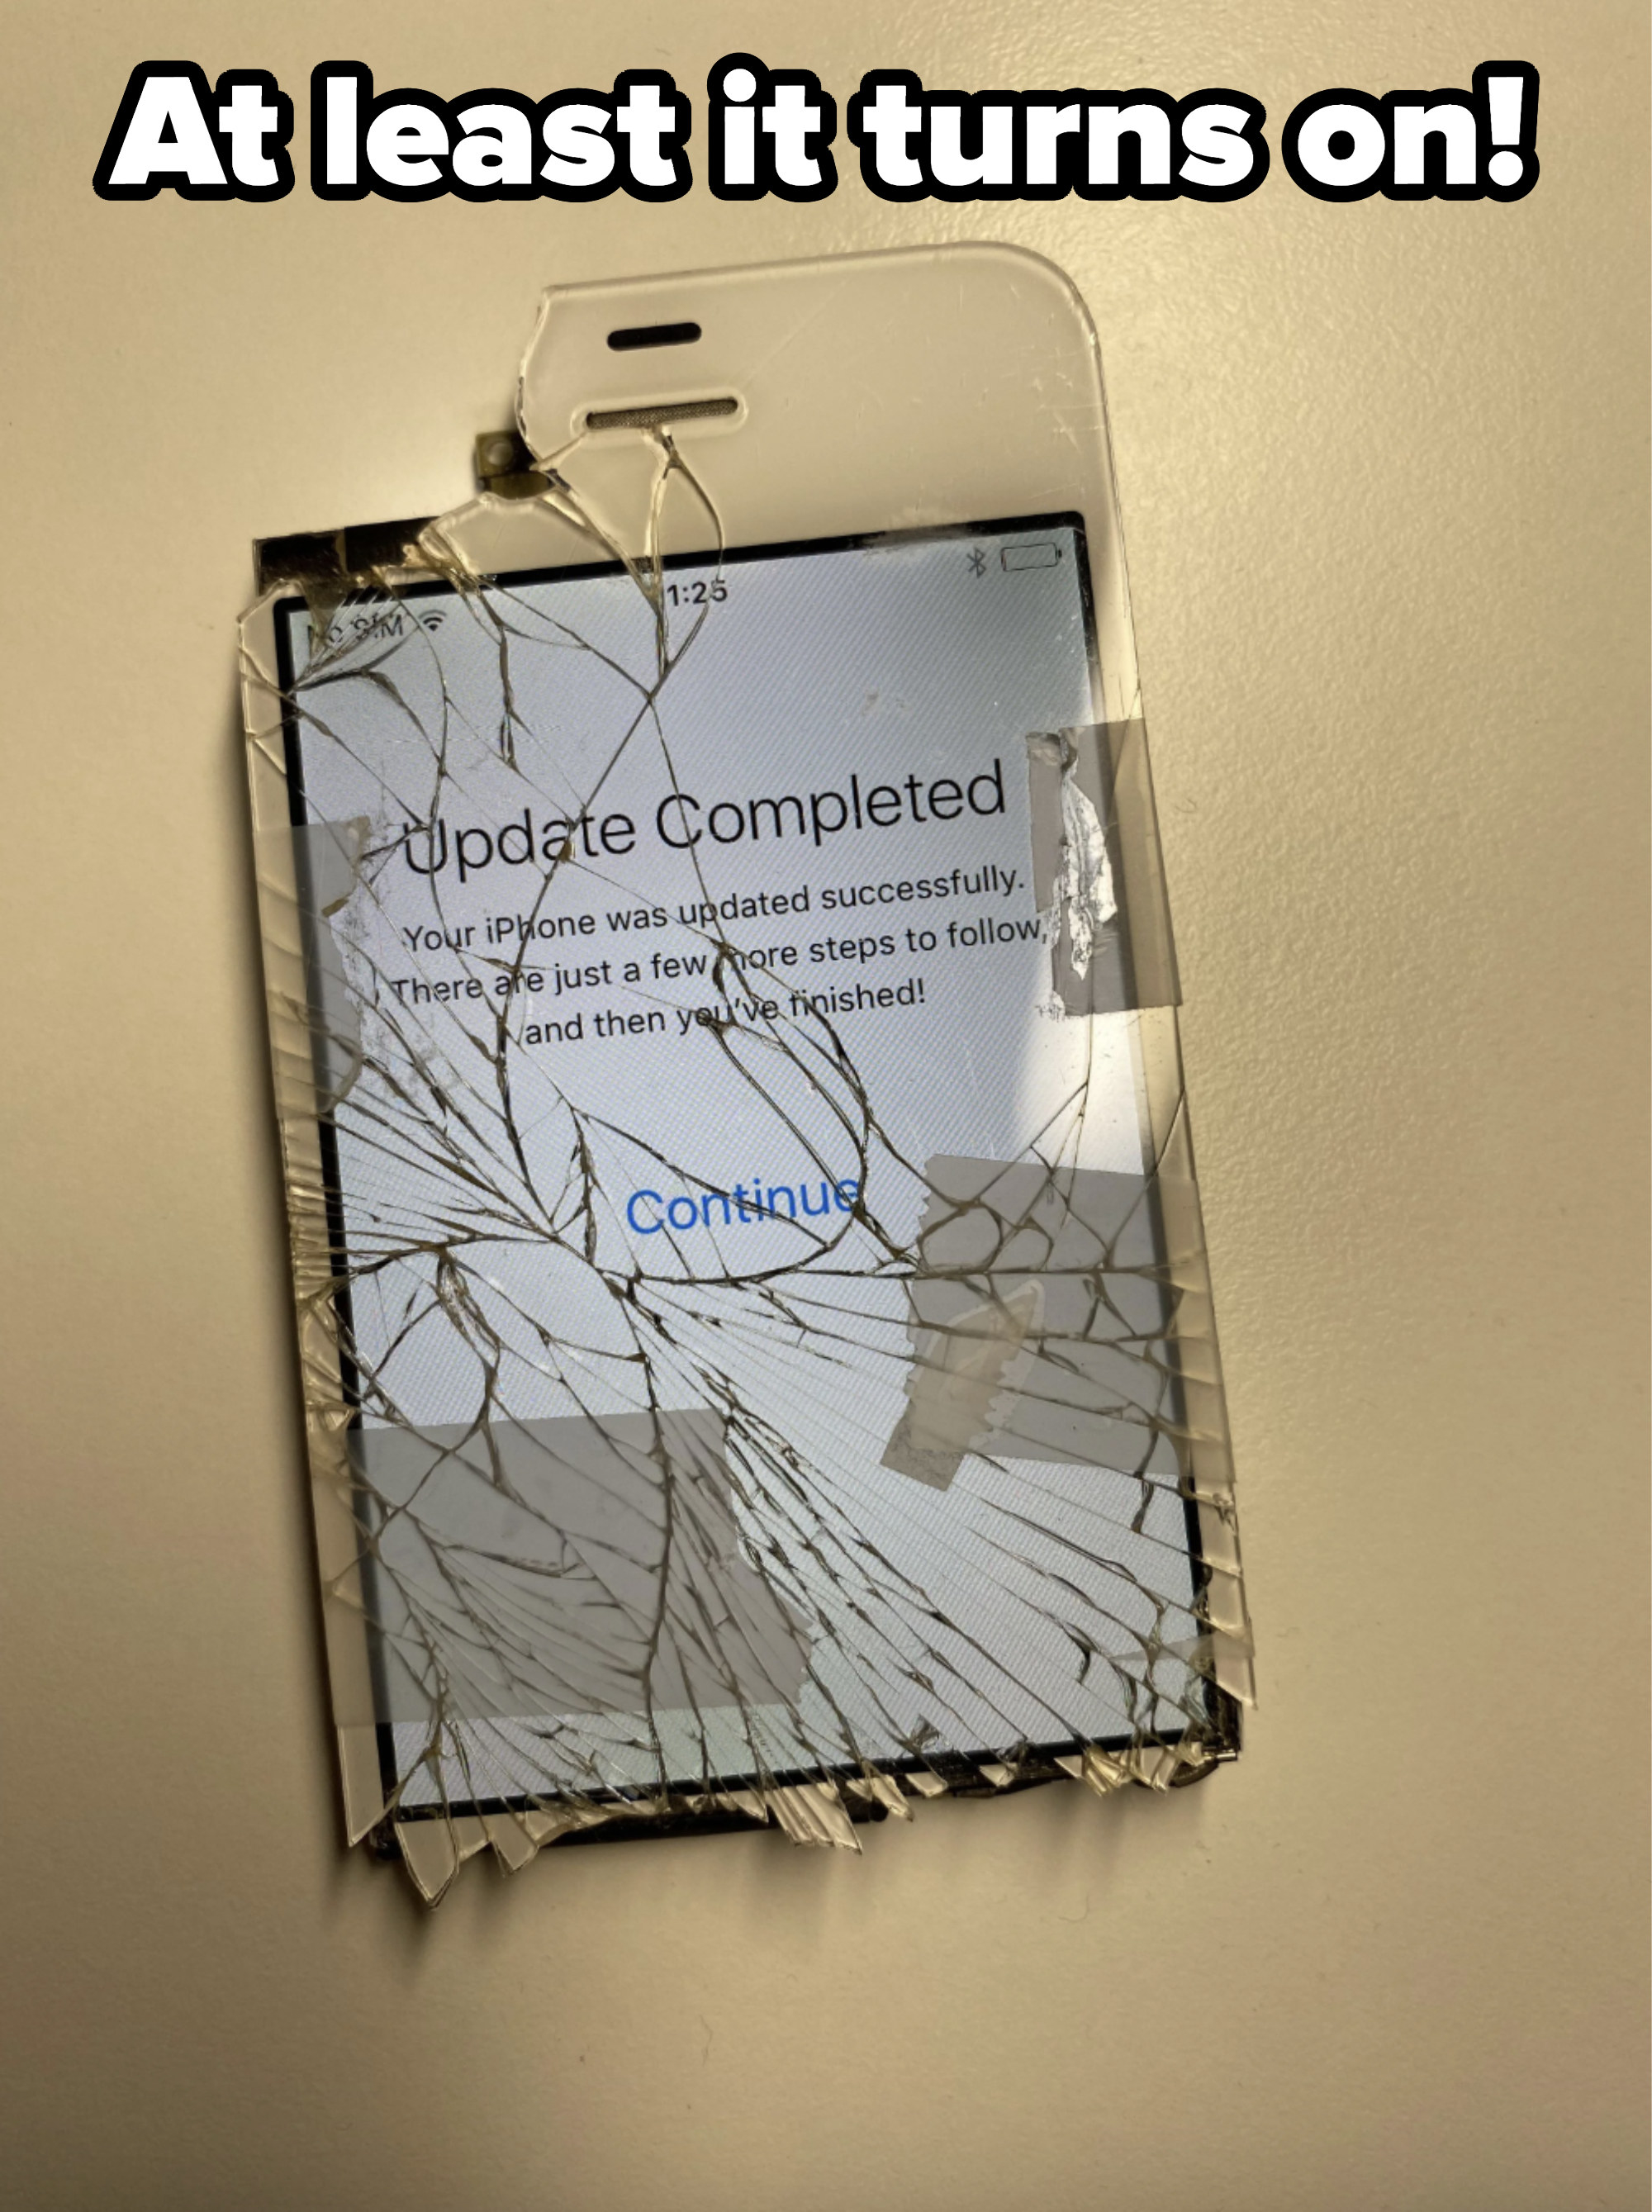 A severely cracked iPhone